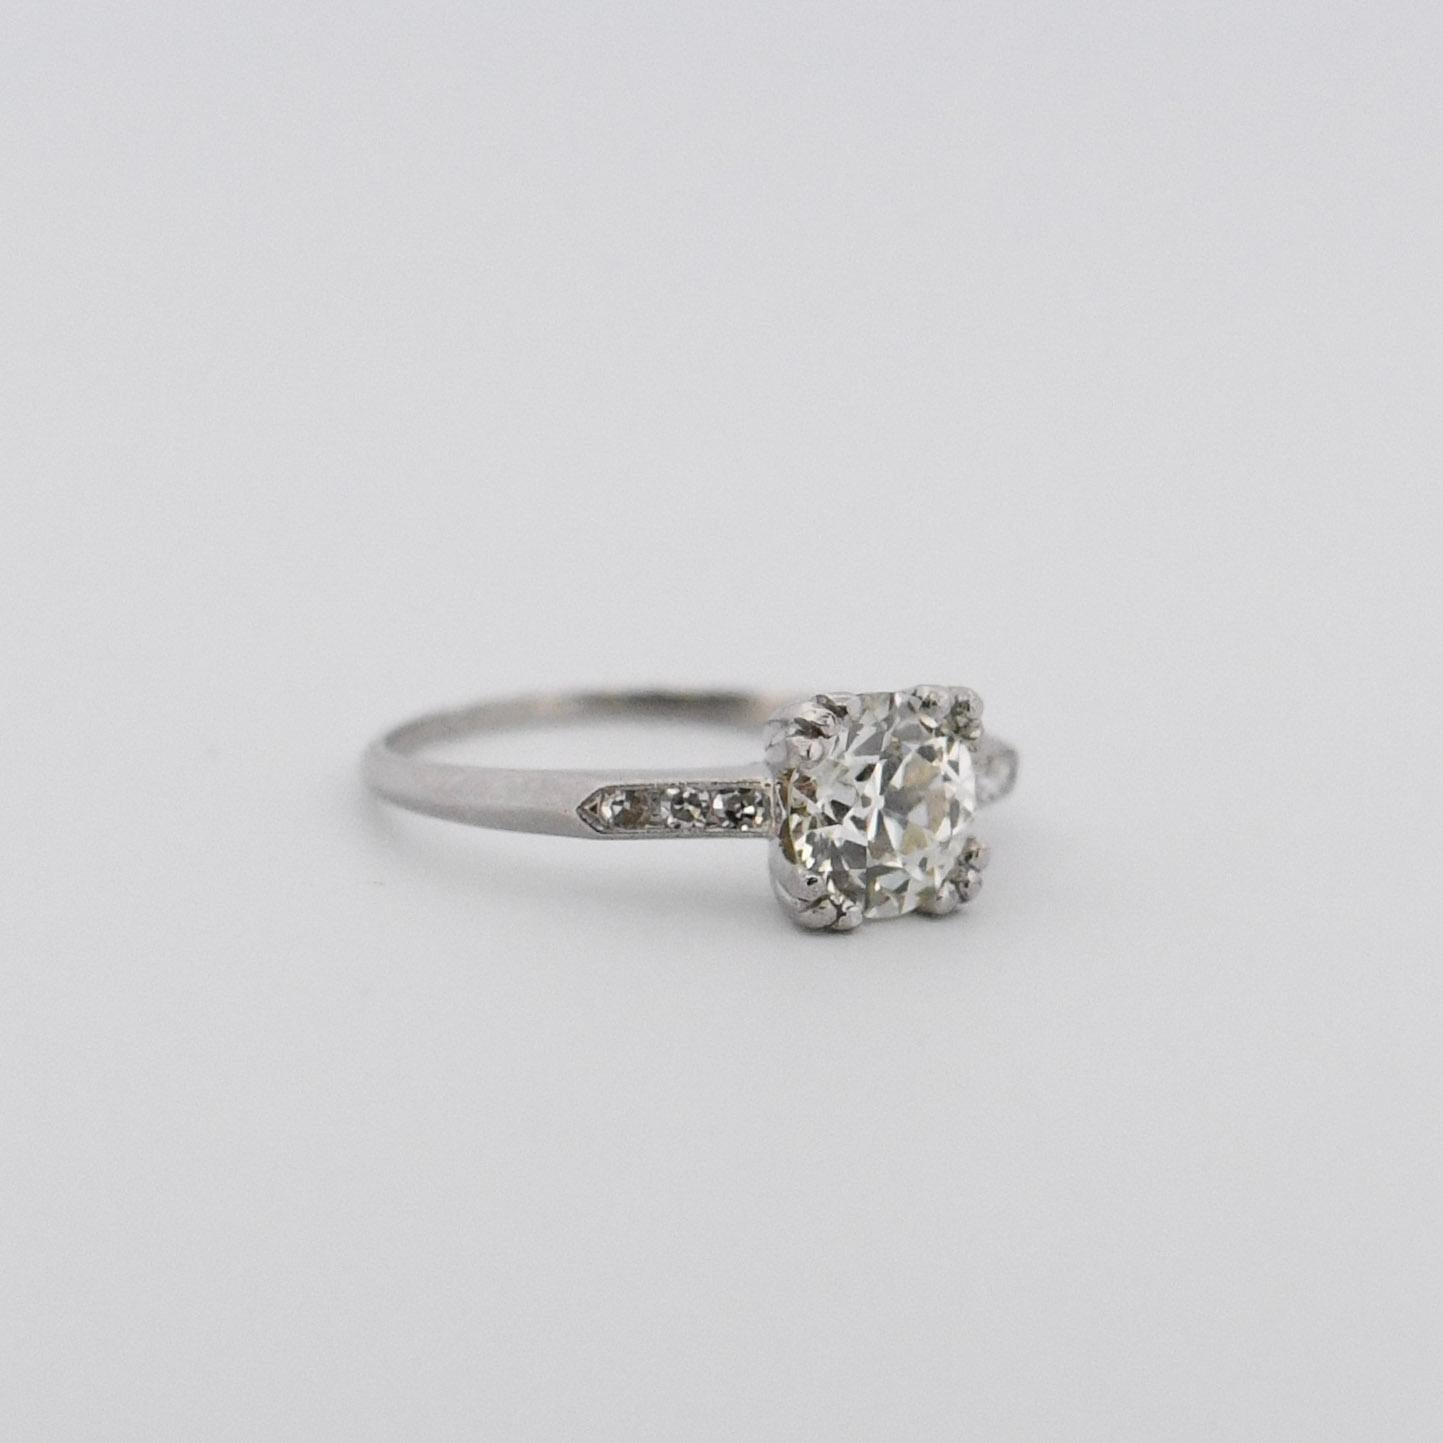 Classic Art Deco Platinum Solitaire Old European Cut Diamond Engagement Ring In Good Condition For Sale In Addison, TX